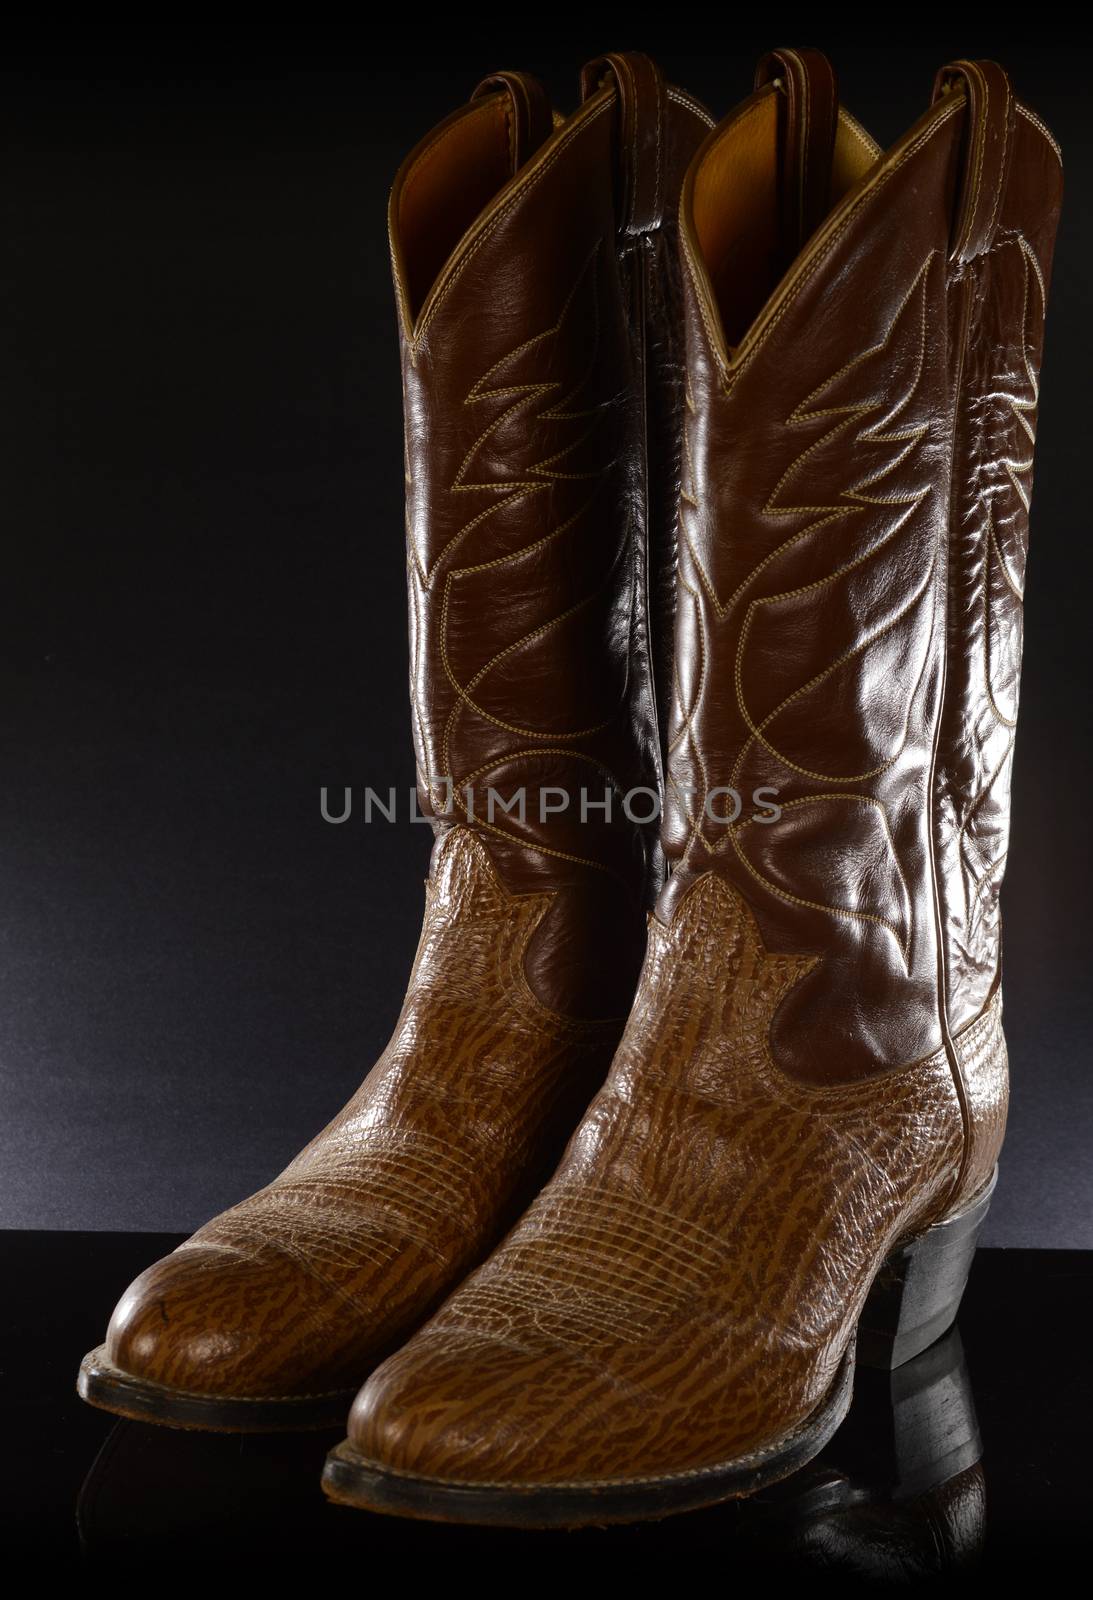 Pair Of Cowboy Boots by AlphaBaby